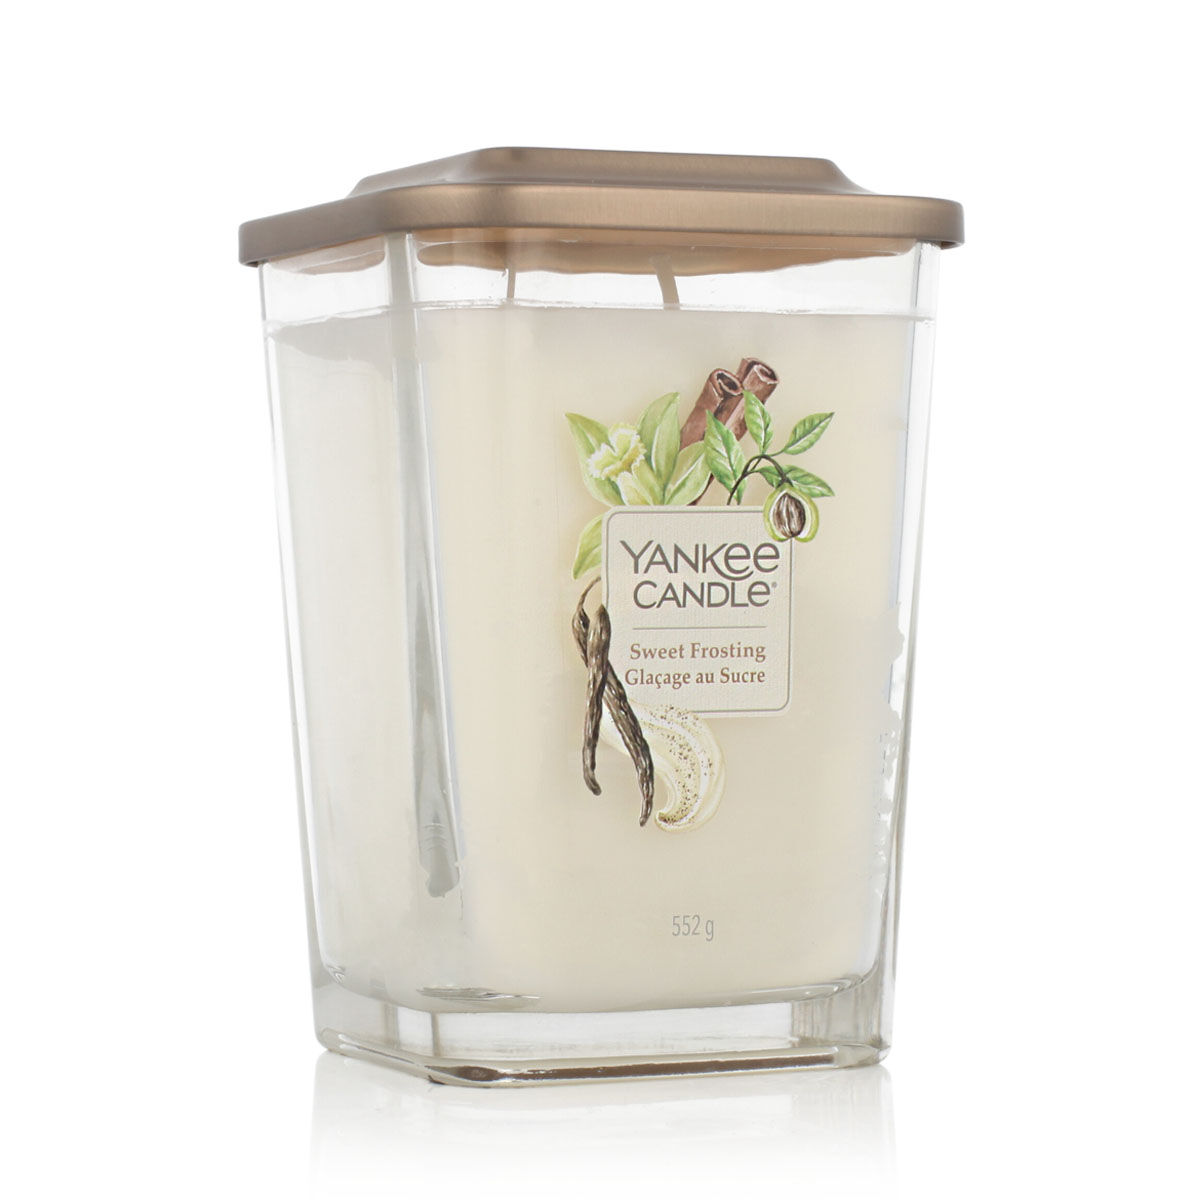 Bougie Parfumée Yankee Candle Sweet Frosting 552 g